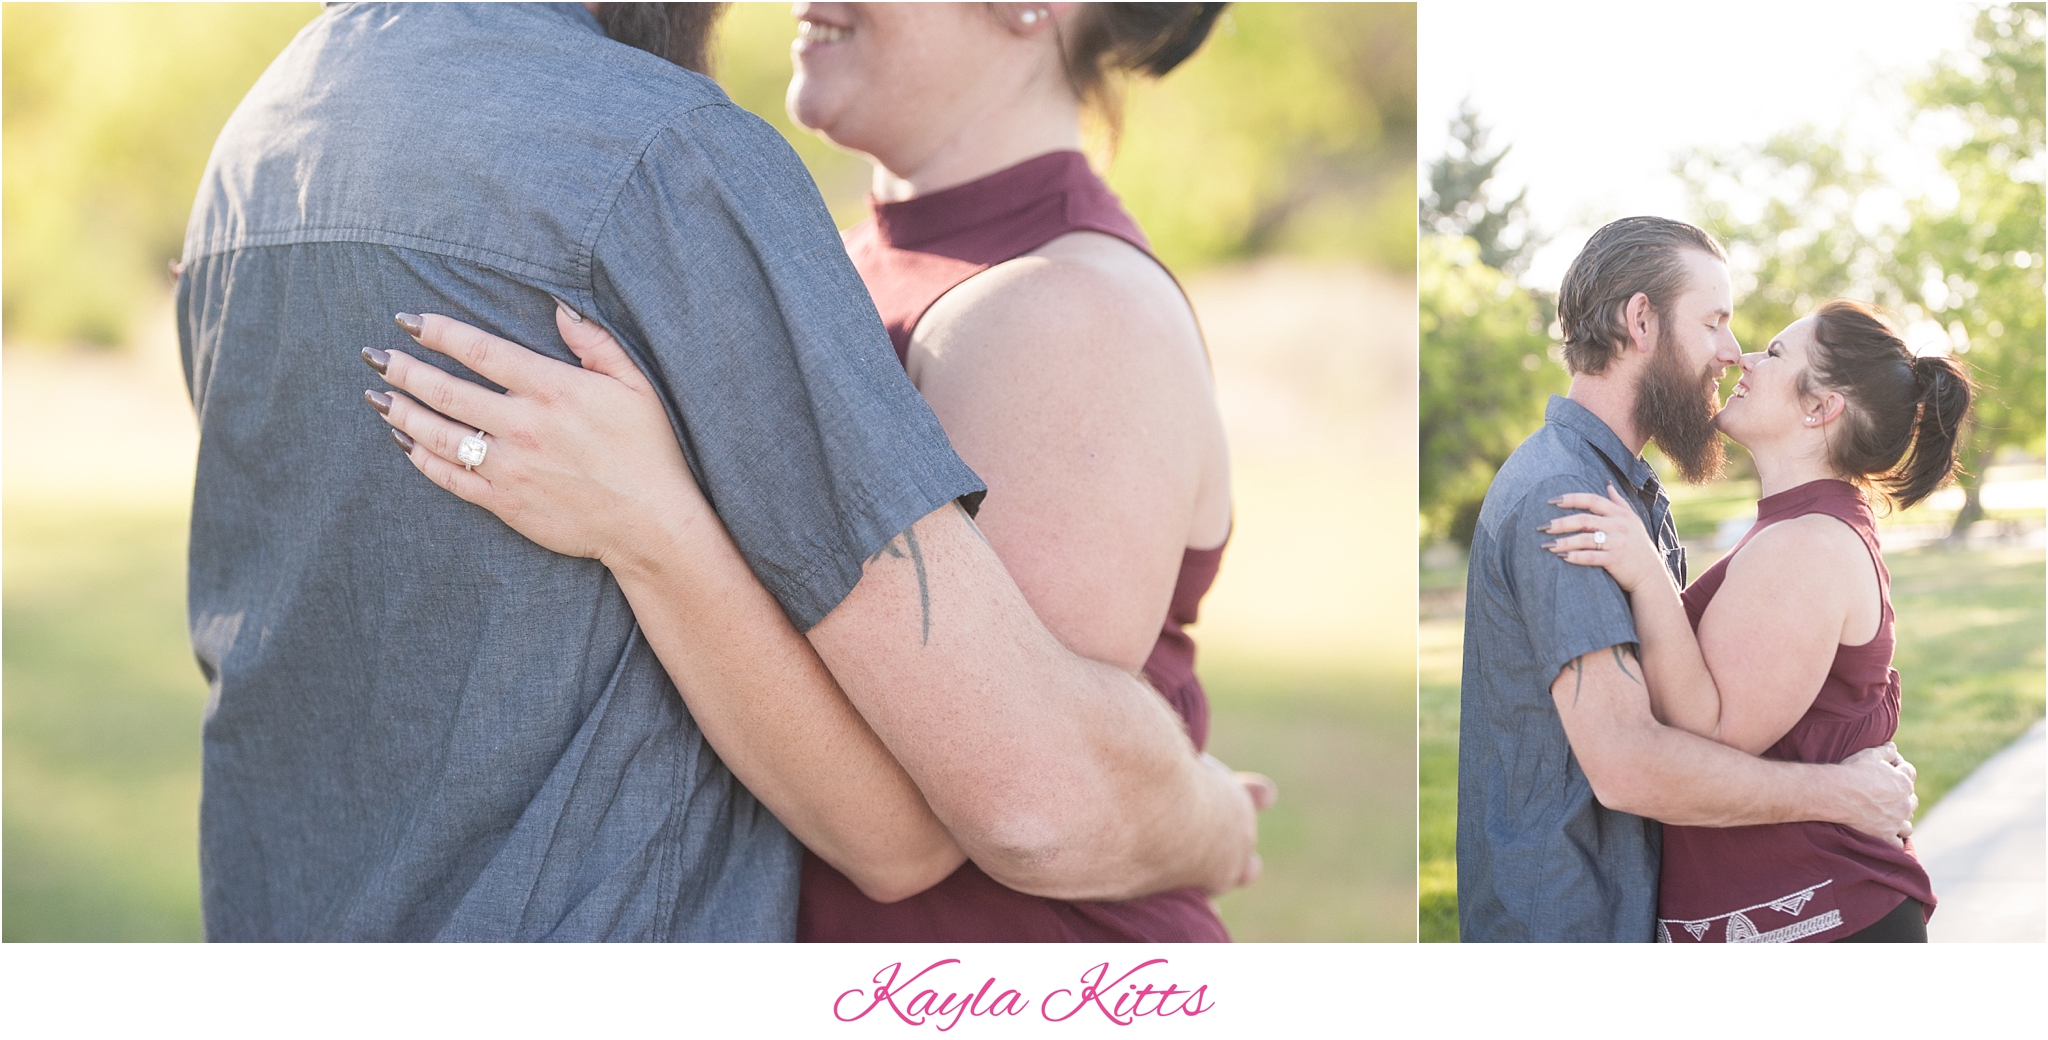 kayla kitts photography - albuquerque wedding photographer - albuquerque engagement photographer - nm wedding - albuquerque wedding - nm wedding - unm engagement - bosque engagement session_0010.jpg